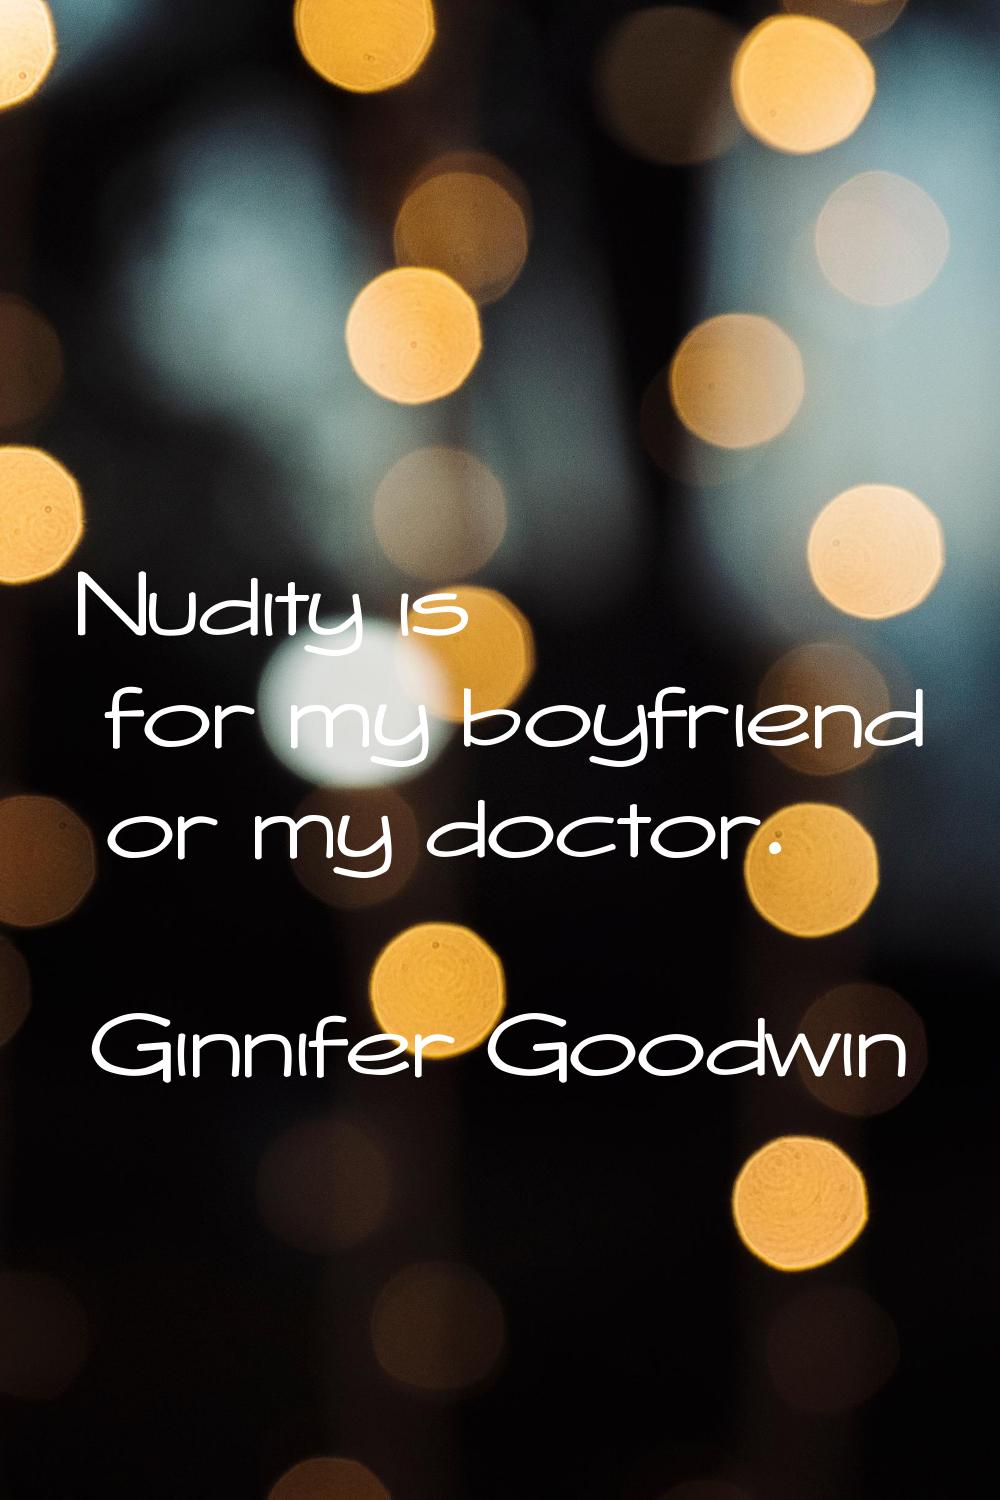 Nudity is for my boyfriend or my doctor.